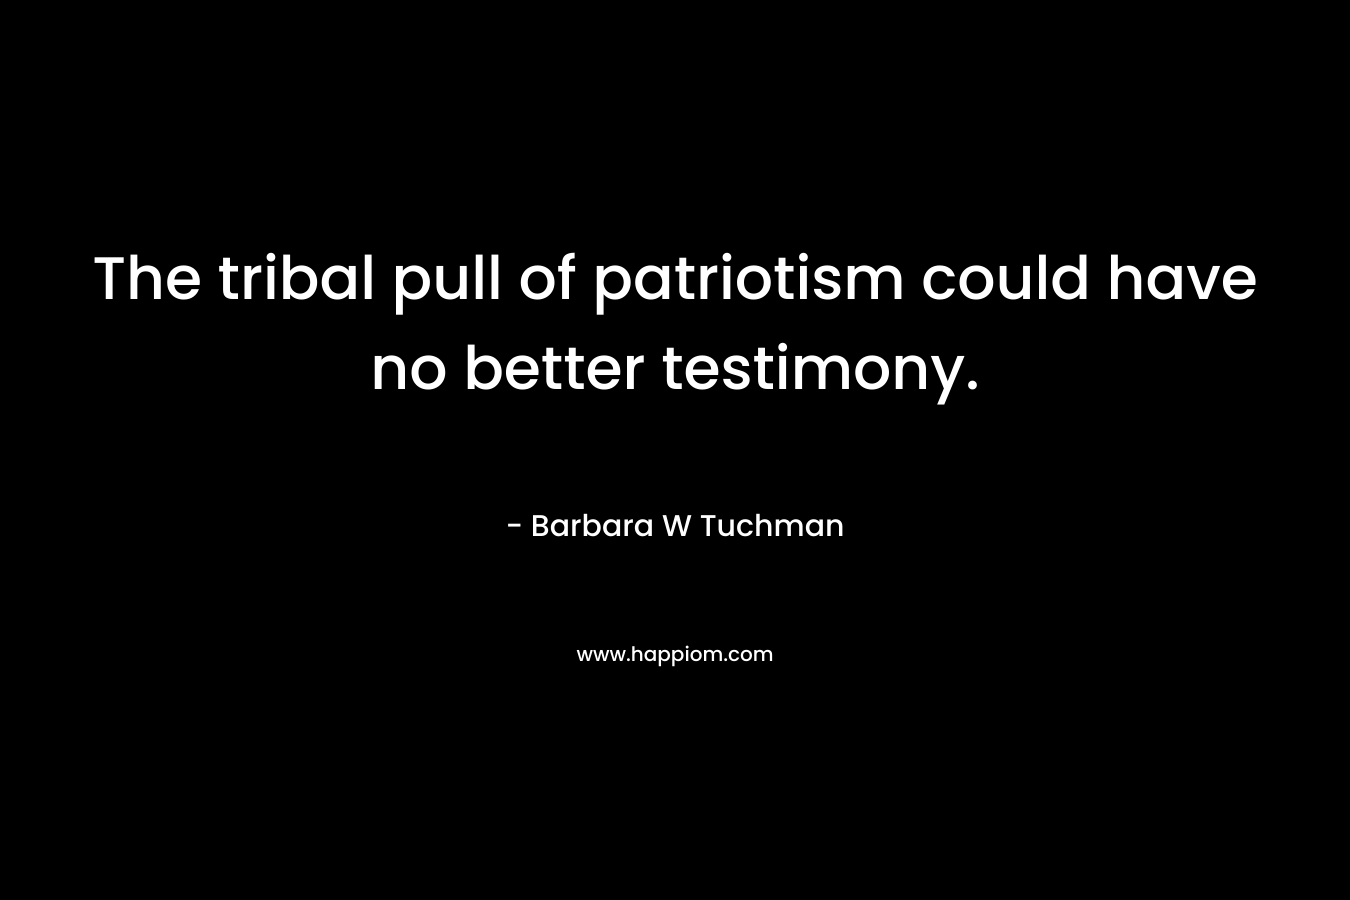 The tribal pull of patriotism could have no better testimony.